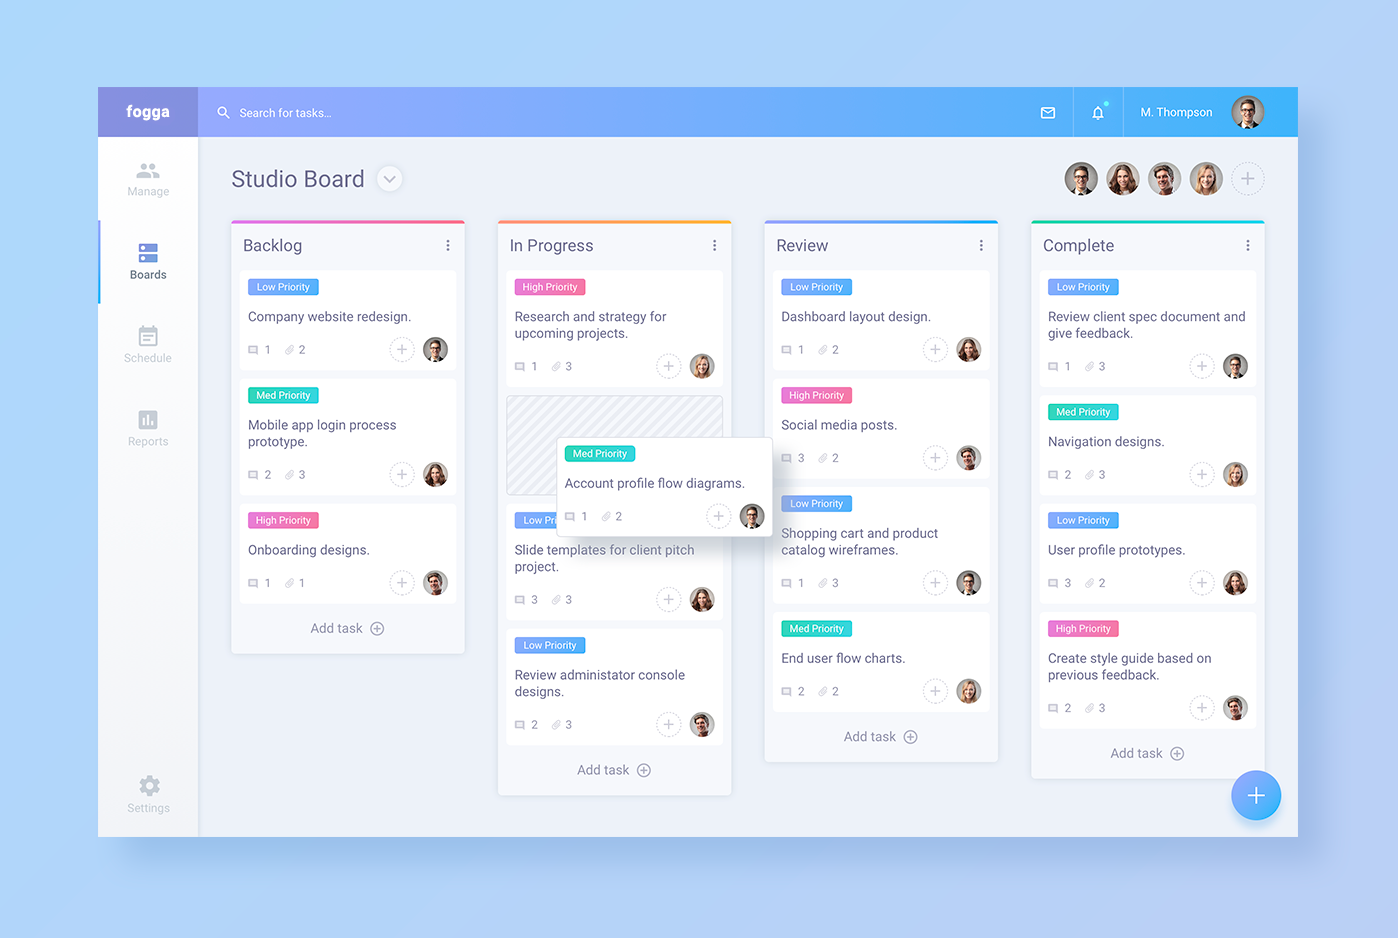 Build A Kanban Based Project Management Tool With This Open Source React Dashboard 5877